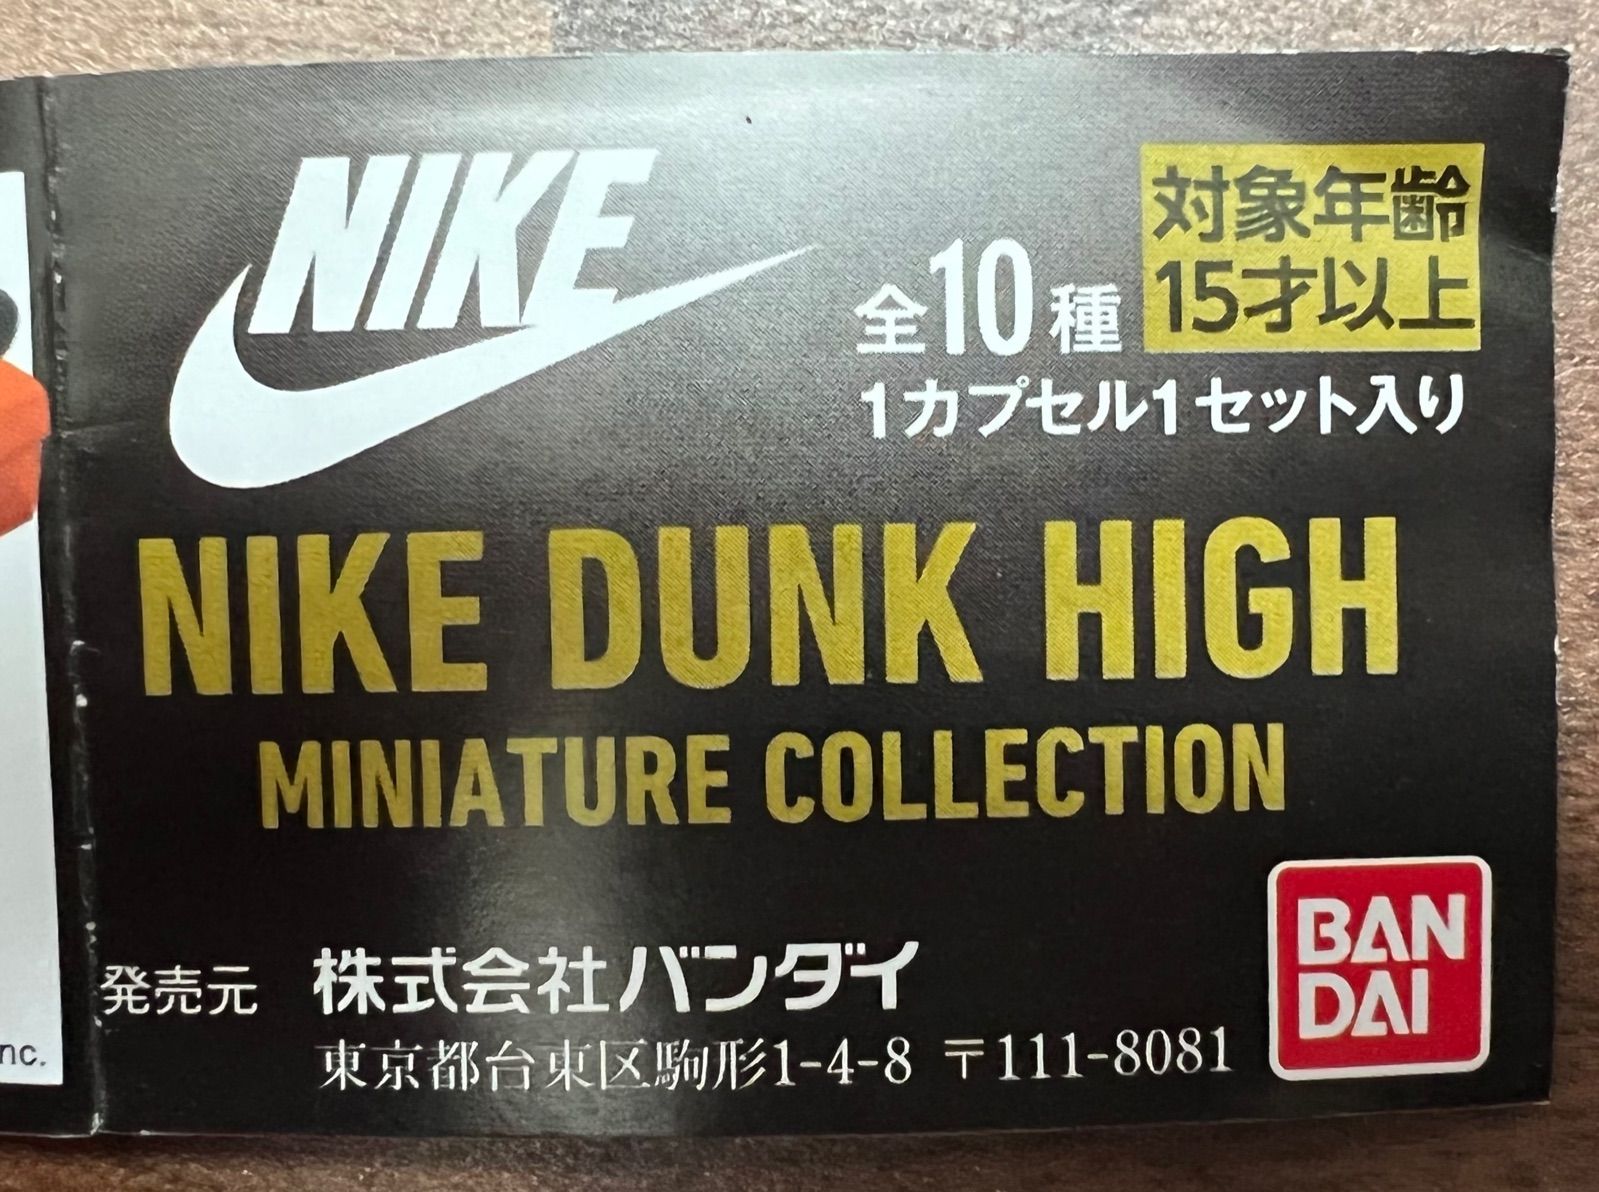 NIKE DUNK HIGH miniature collection 10個